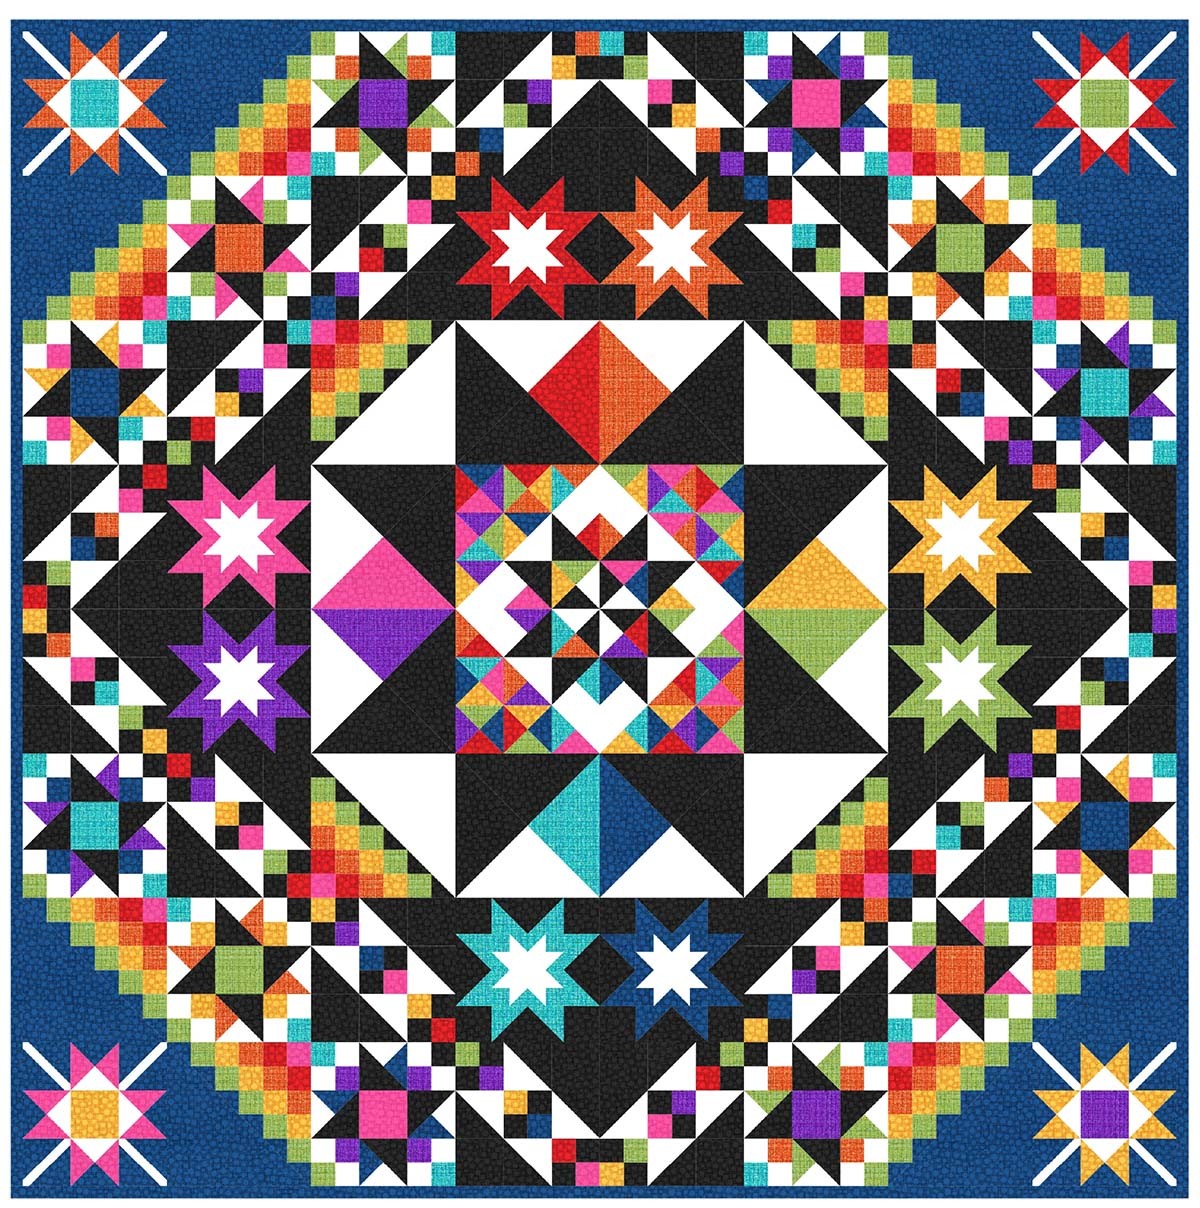 Fabulous Block of the Month Quilt by Charisma Horton